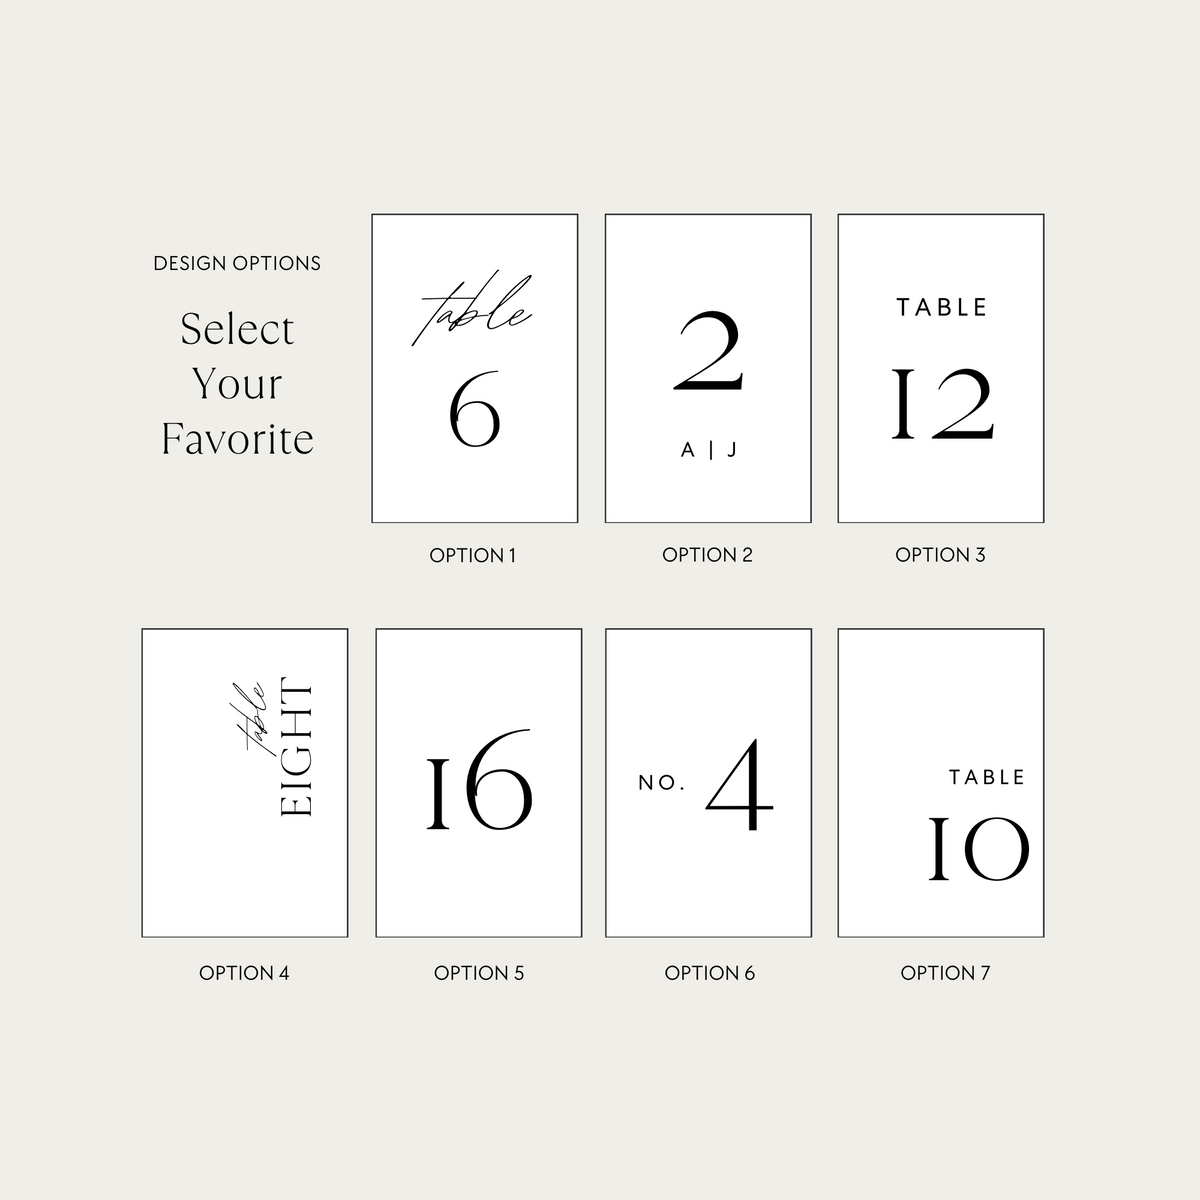 Wedding Marble Stone Table Numbers Design Options